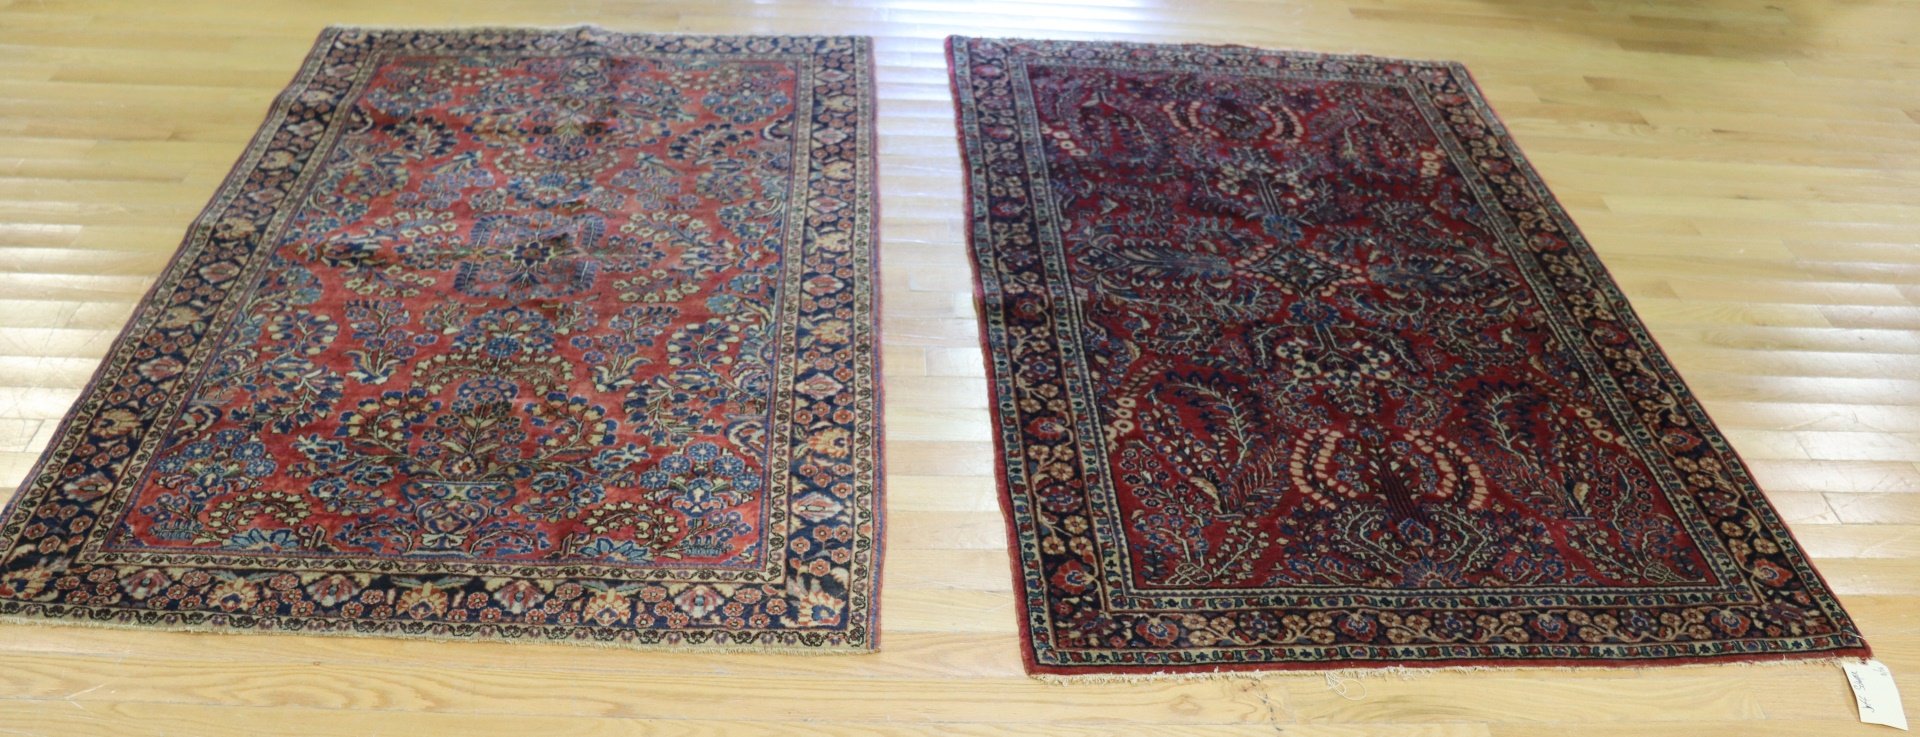 2 ANTIQUE FINELY HAND WOVEN SAROUK 3b9714